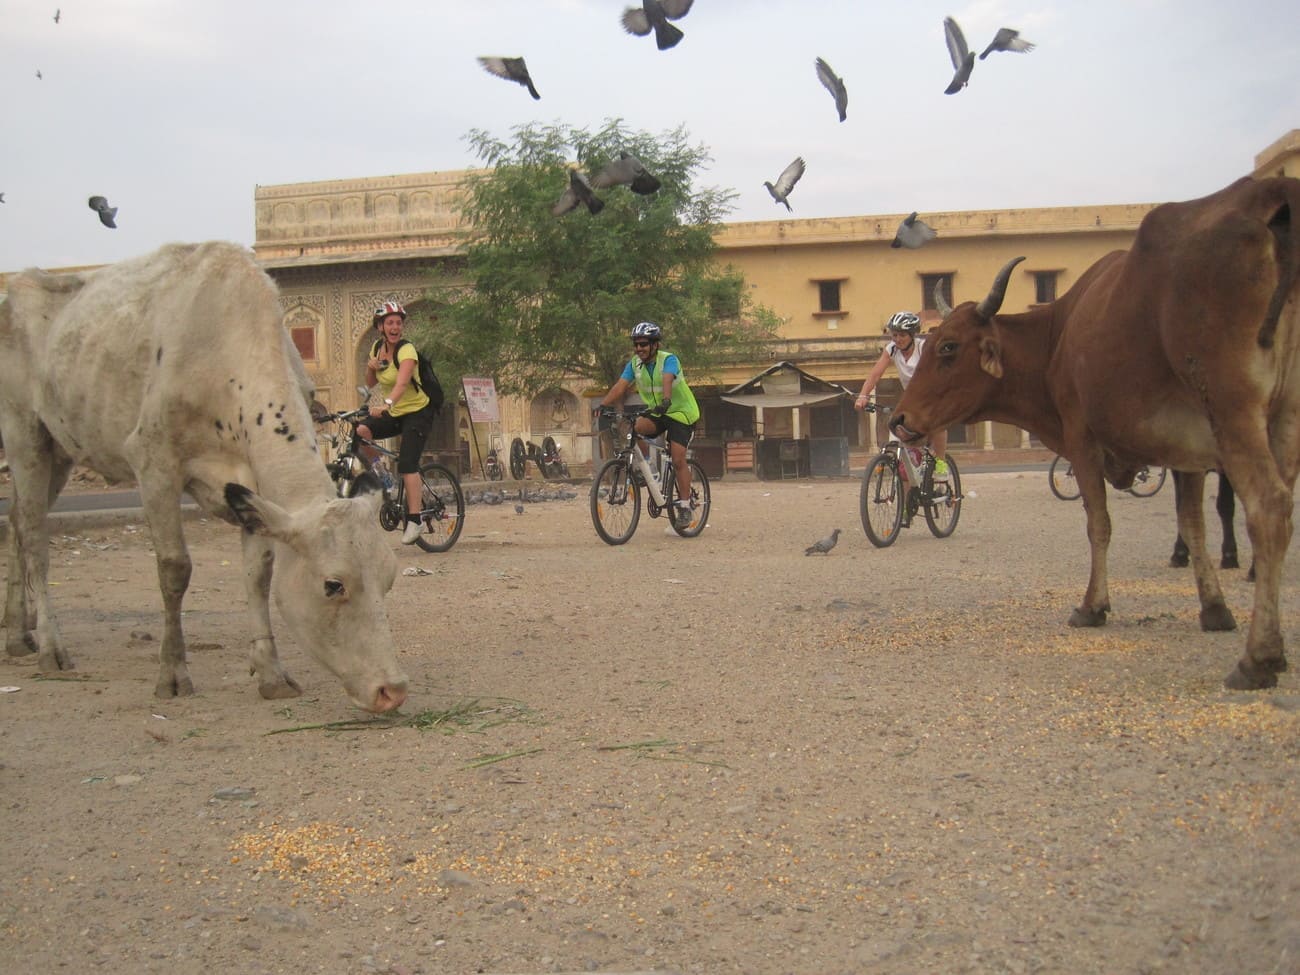 Cows on the road in Jaipur